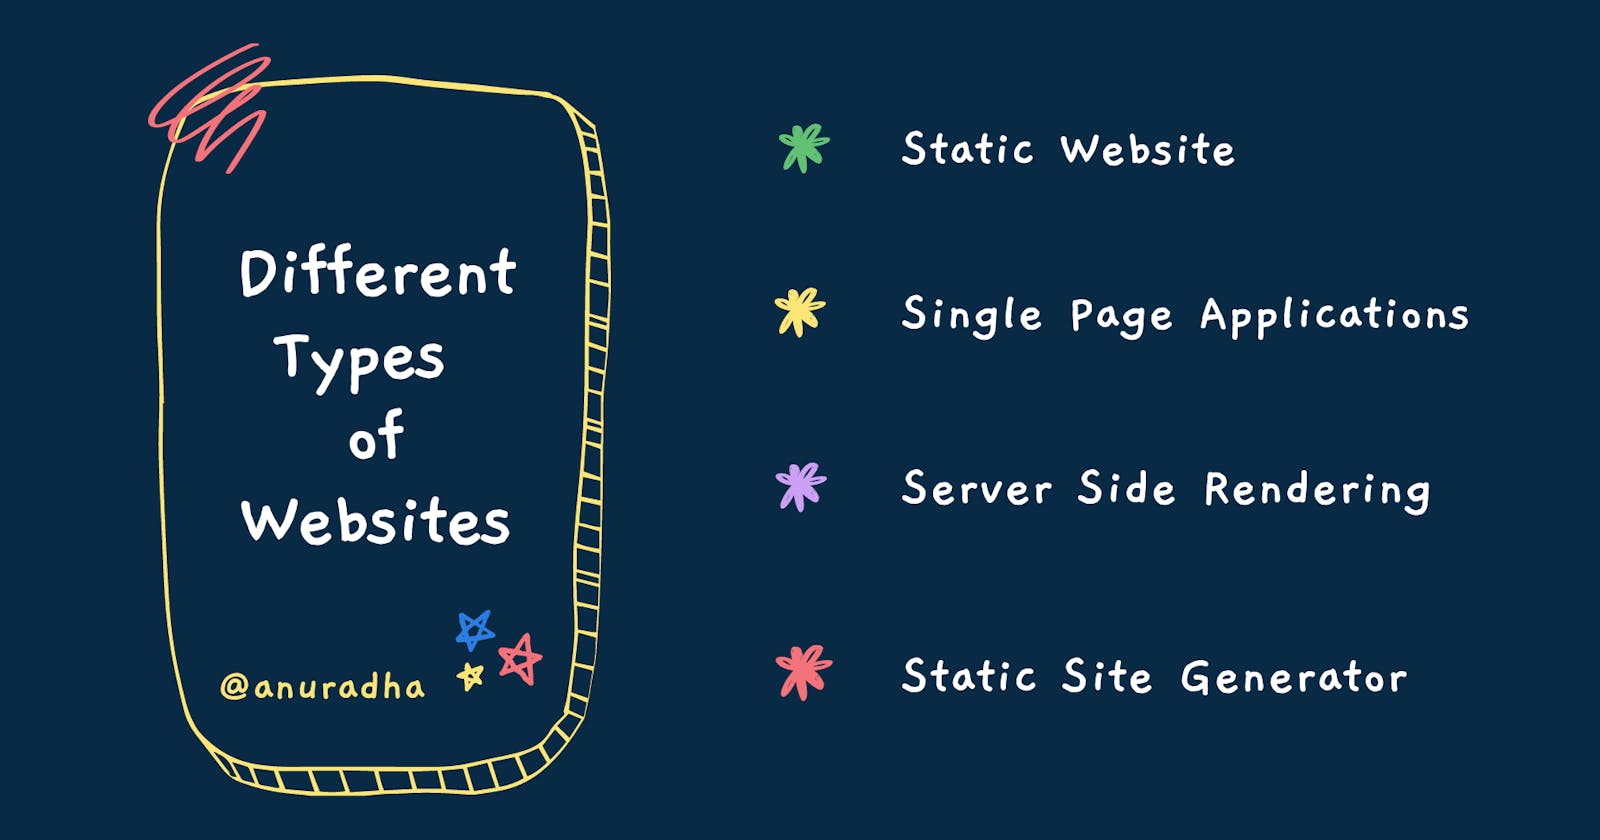 Different Types of Websites